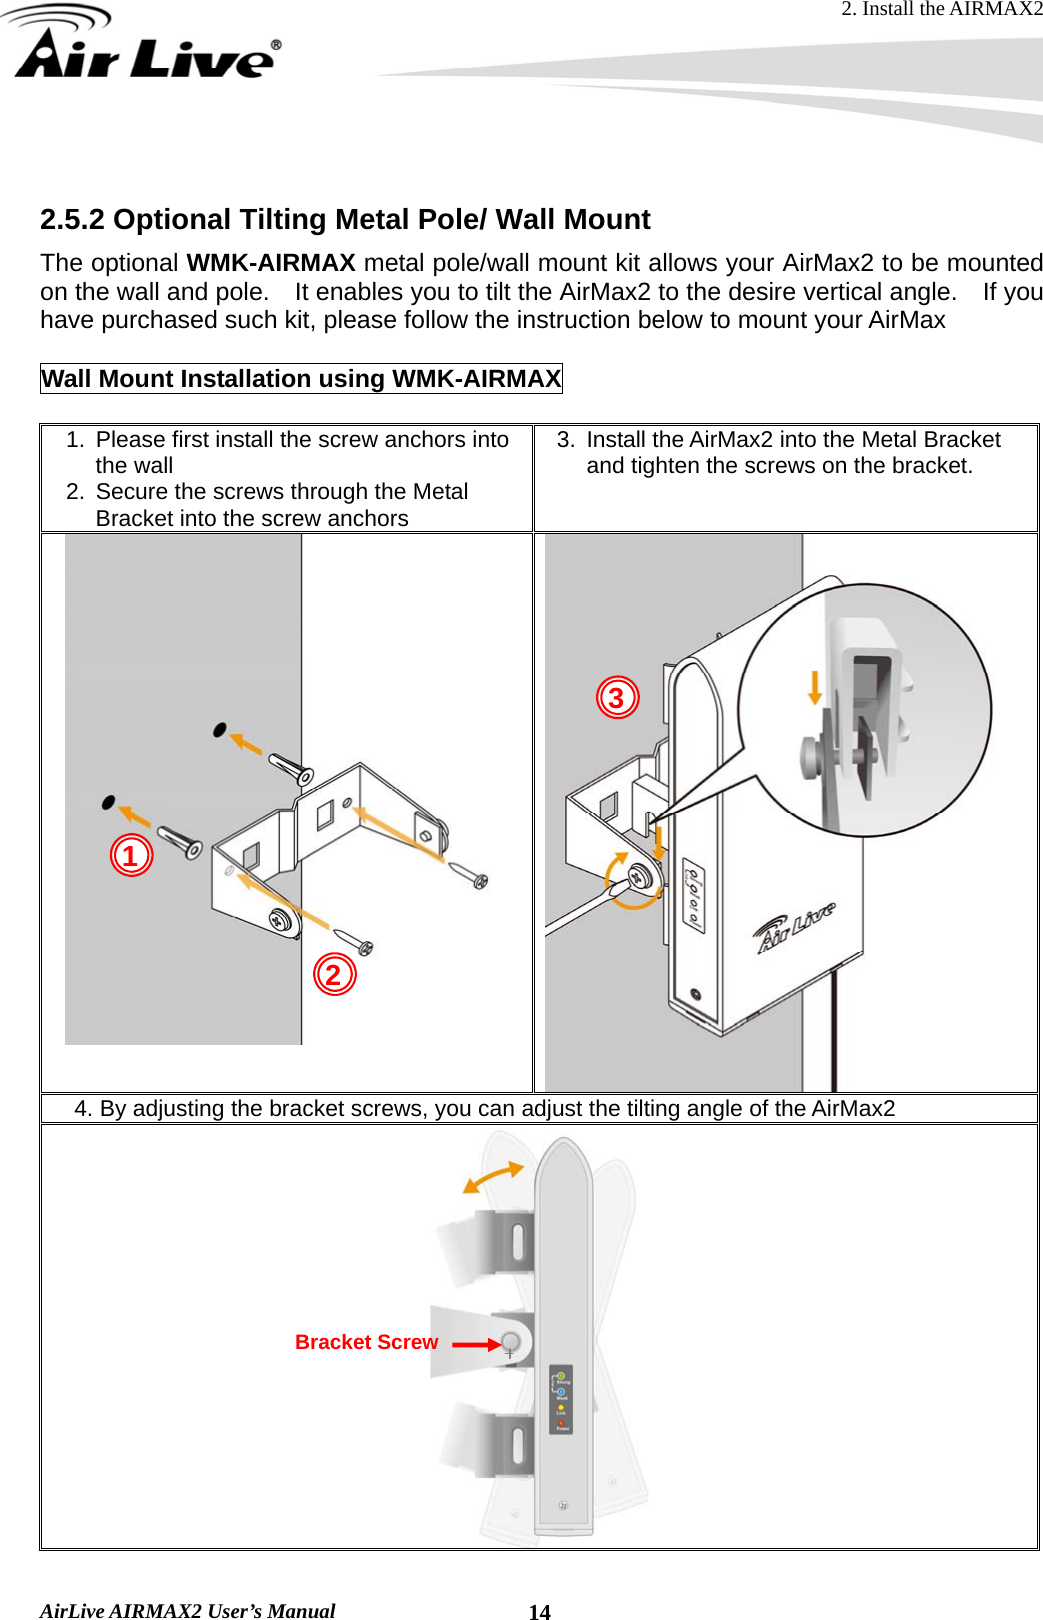 2. Install the AIRMAX2  AirLive AIRMAX2 User’s Manual  14  2.5.2 Optional Tilting Metal Pole/ Wall Mount The optional WMK-AIRMAX metal pole/wall mount kit allows your AirMax2 to be mounted on the wall and pole.    It enables you to tilt the AirMax2 to the desire vertical angle.    If you have purchased such kit, please follow the instruction below to mount your AirMax  Wall Mount Installation using WMK-AIRMAX  1.  Please first install the screw anchors into the wall 2.  Secure the screws through the Metal Bracket into the screw anchors 3.  Install the AirMax2 into the Metal Bracket and tighten the screws on the bracket.  4. By adjusting the bracket screws, you can adjust the tilting angle of the AirMax2  1 2 3Bracket Screw 